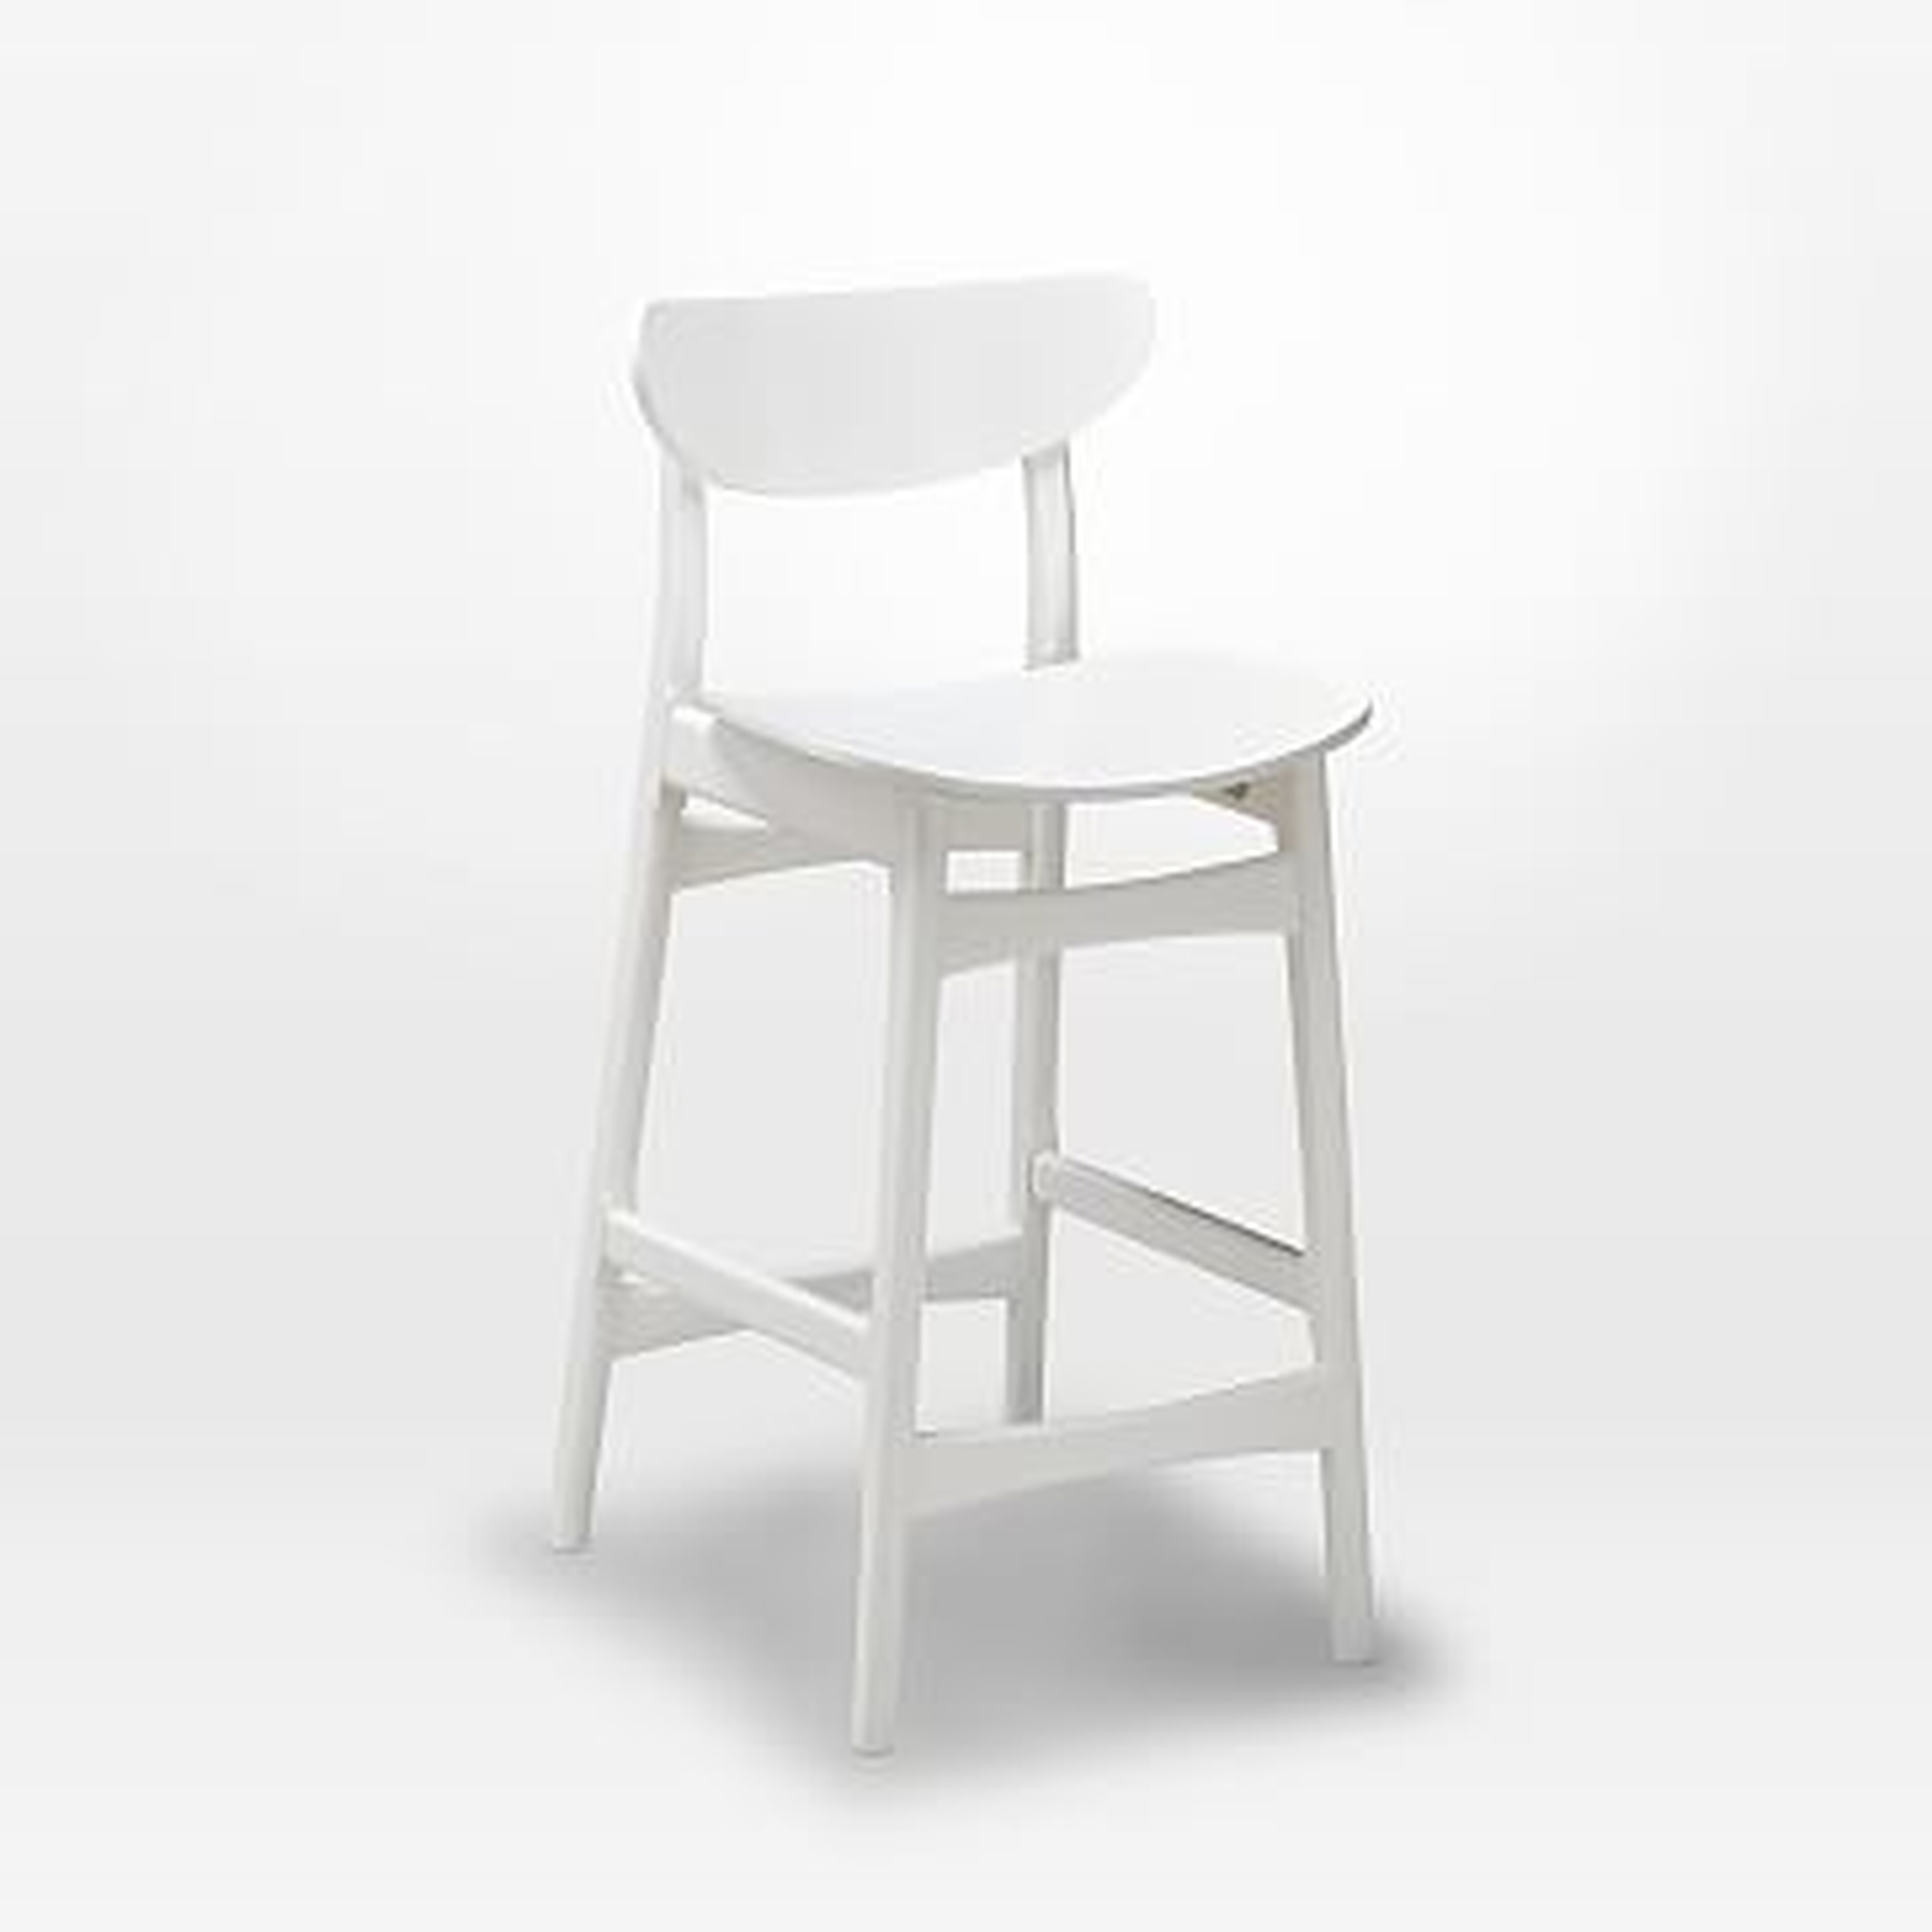 Classic Cafe Lacquer Counter Stool, White Lacquer - West Elm